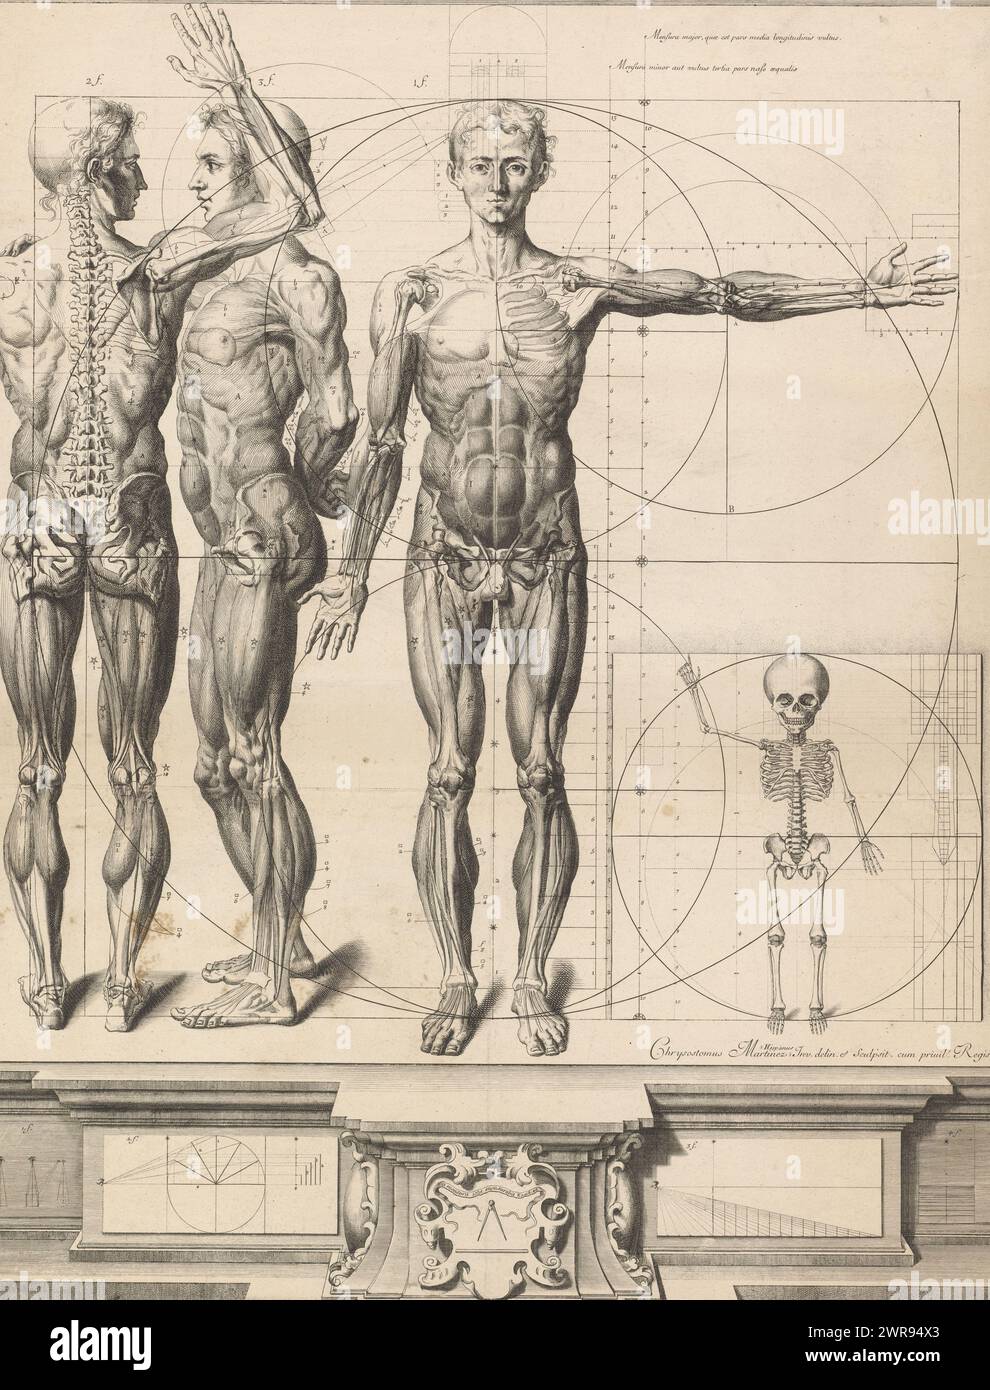 Anatomy print with three views of a man and a child's skeleton, Nouvelles figures de proportions et d'anatomie du corps humain, The proportions of the body indicated with circles., print maker: Crisóstomo Alejandrino José Martínez y Sorlí, after own design by: Crisóstomo Alejandrino José Martínez y Sorlí, Franse kroon, 1638 - 1694, paper, etching, height 685 mm × width 520 mm, print Stock Photo